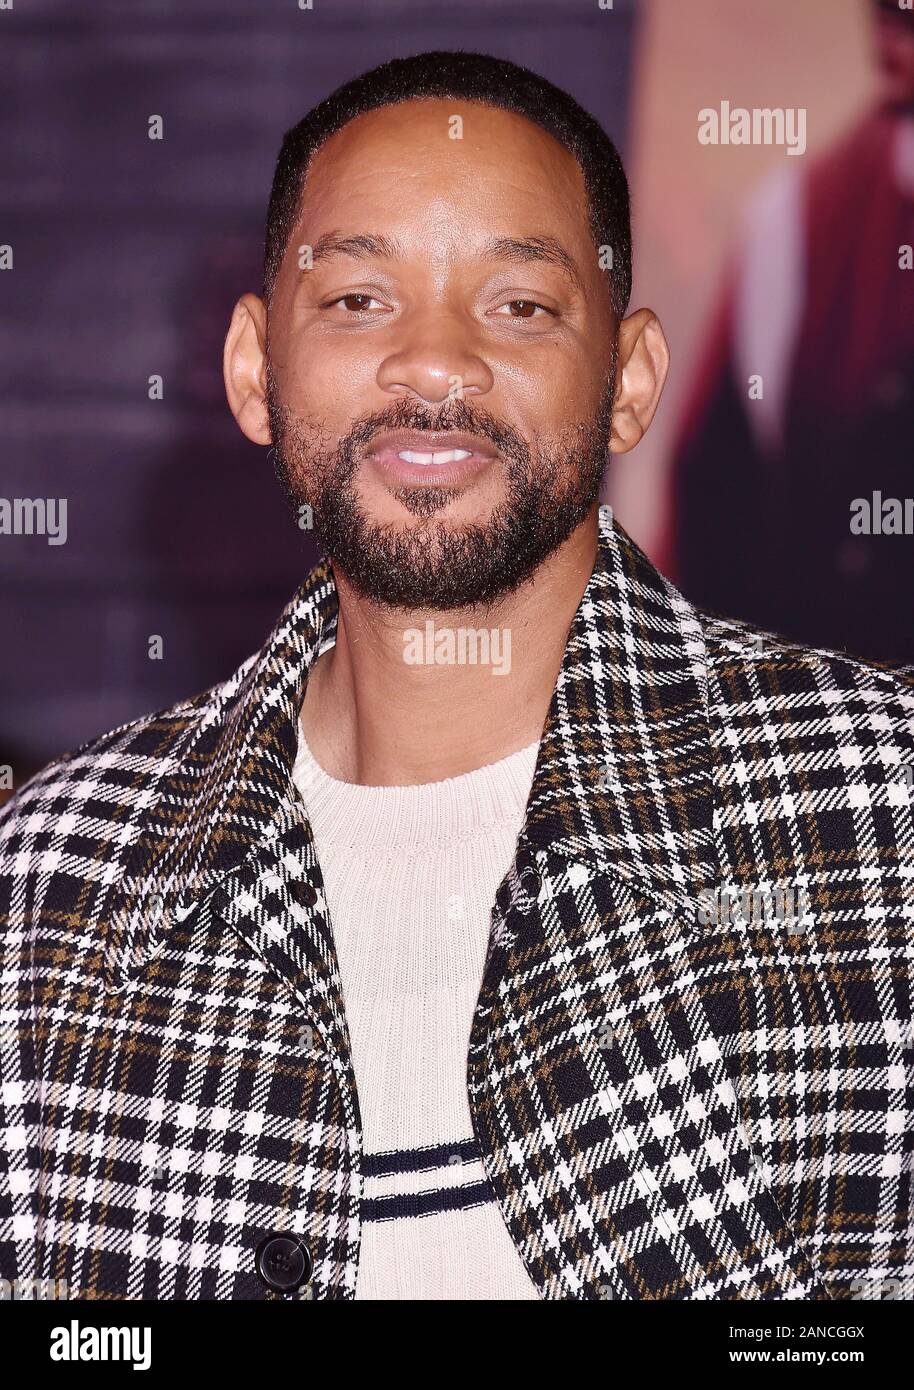 HOLLYWOOD, CA - JANUARY 14: Will Smith attends the premiere of Columbia Pictures' "Bad Boys For Life" at TCL Chinese Theatre on January 14, 2020 in Hollywood, California. Stock Photo